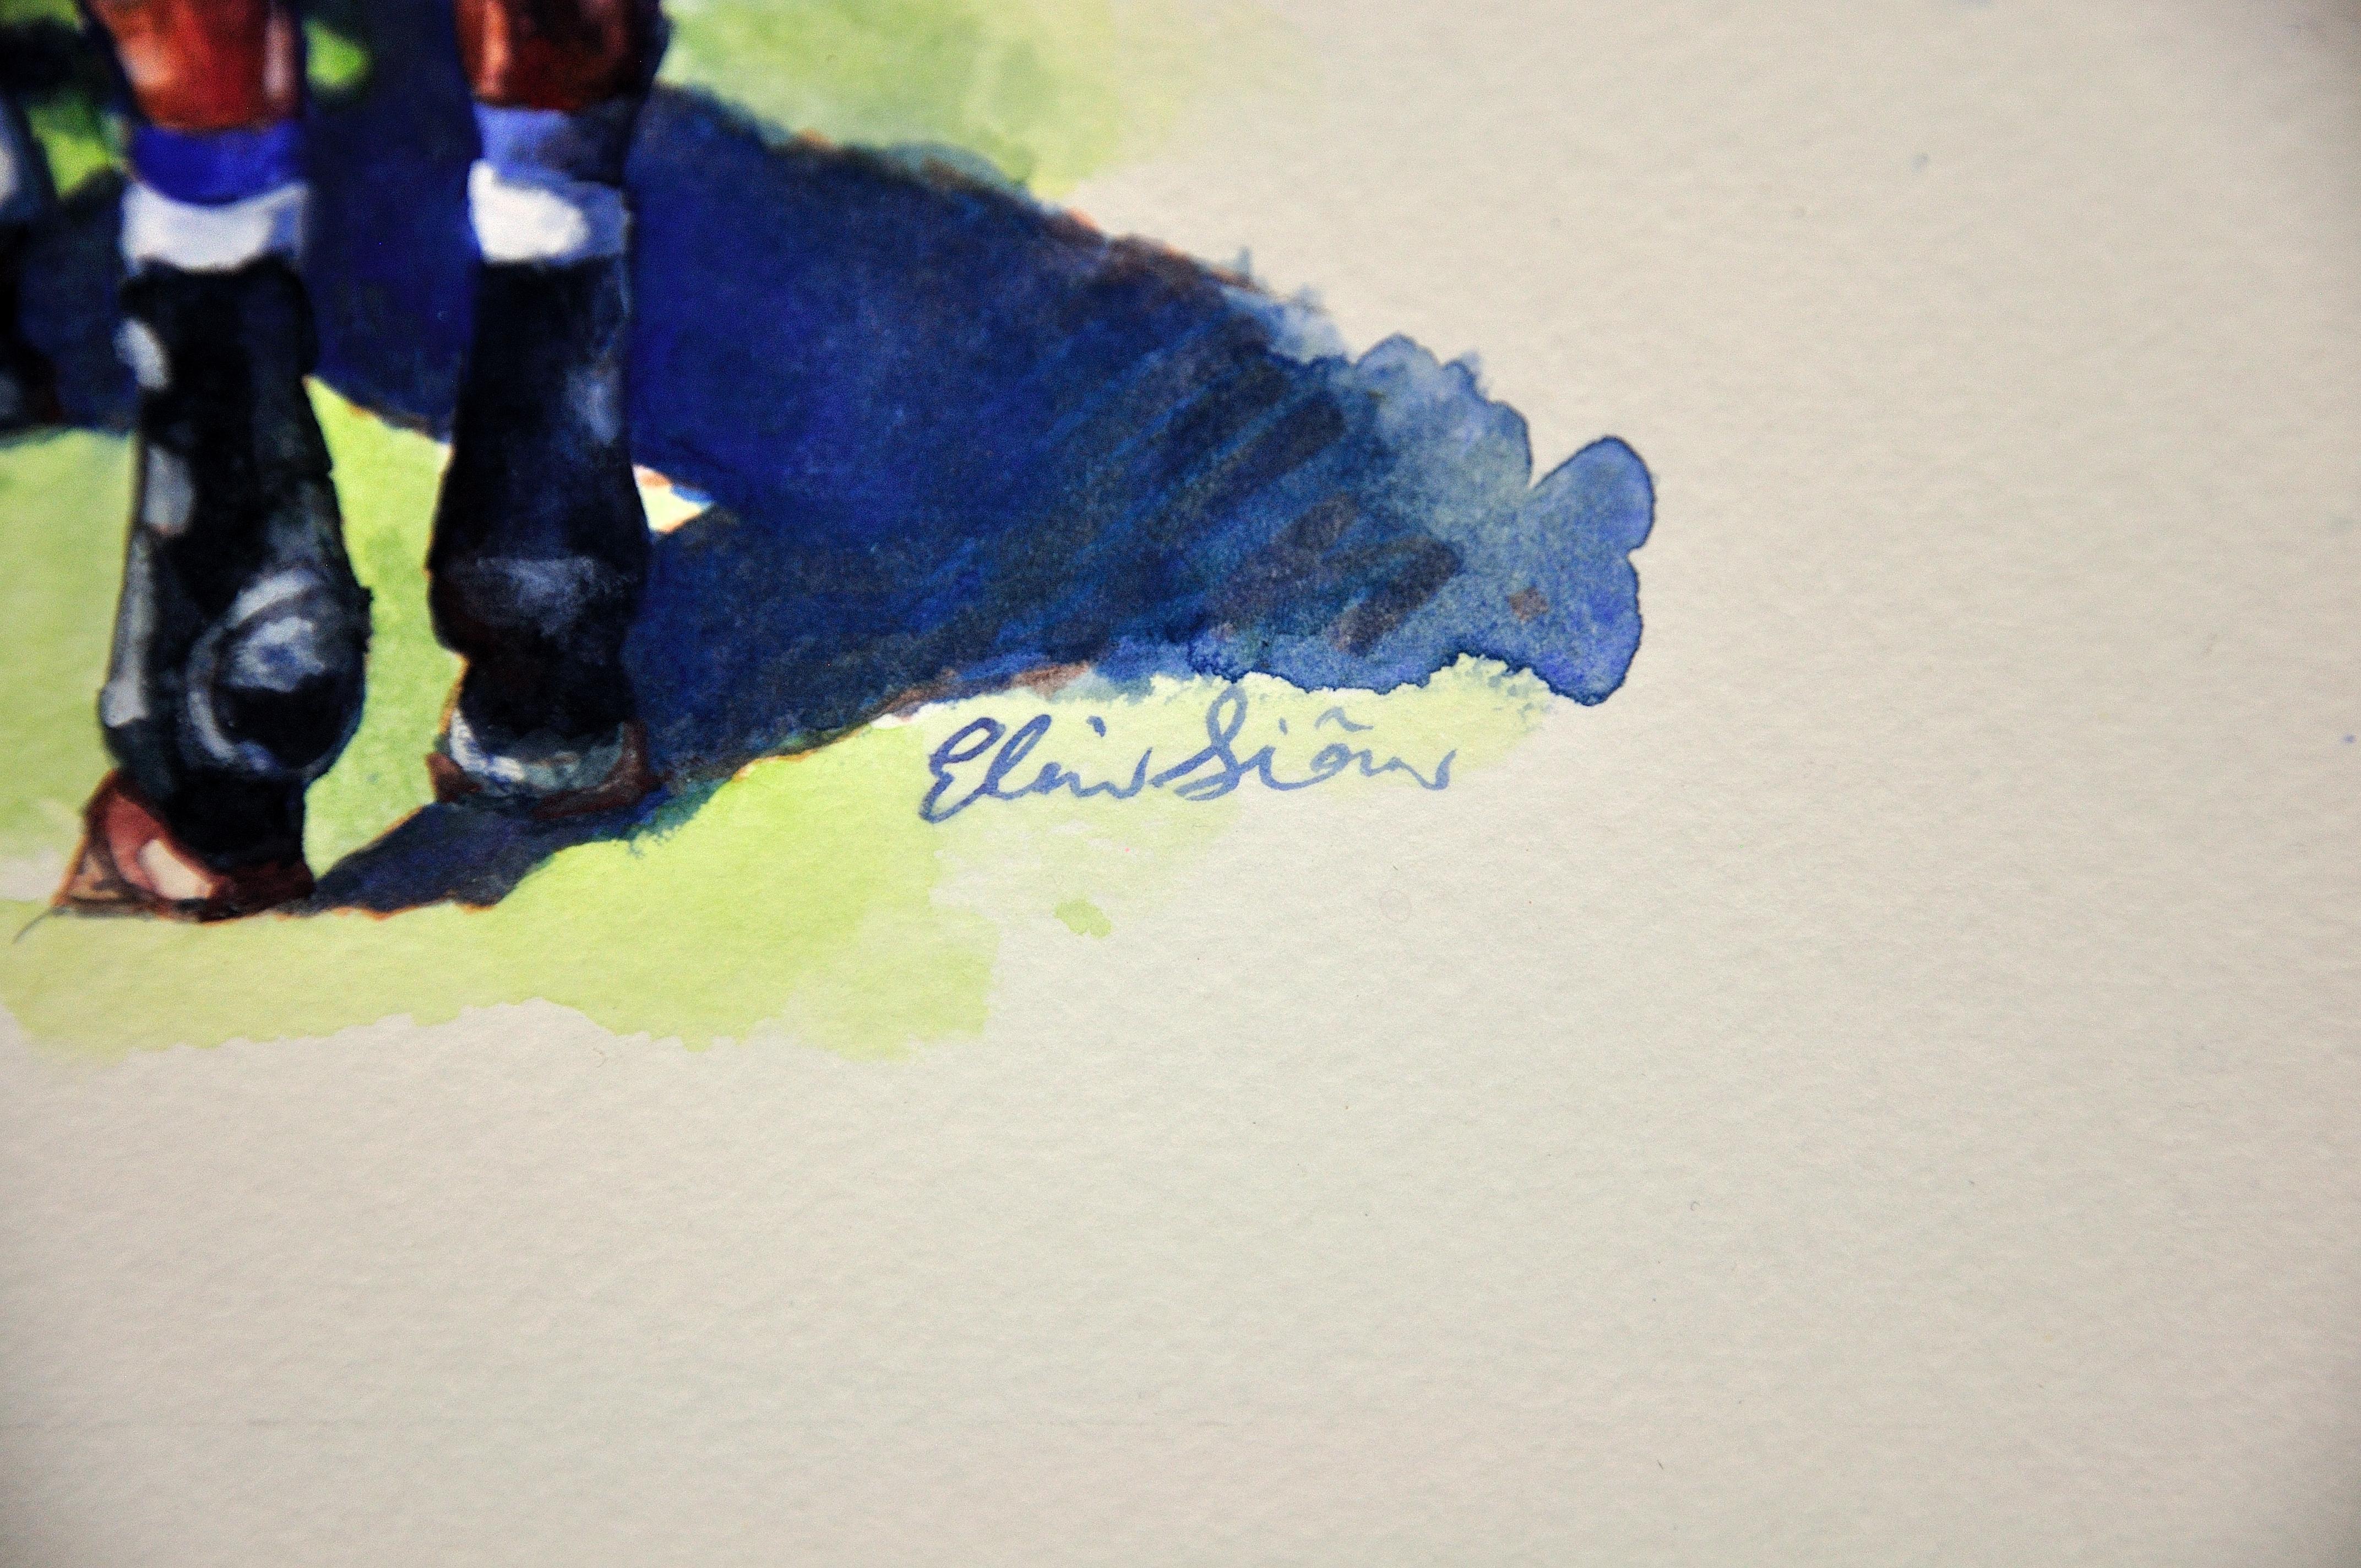 Polo Match, Cirencester, Player and Pony. Cotswolds. Parkland. Framed Watercolor - Realist Art by Elin Sian Blake